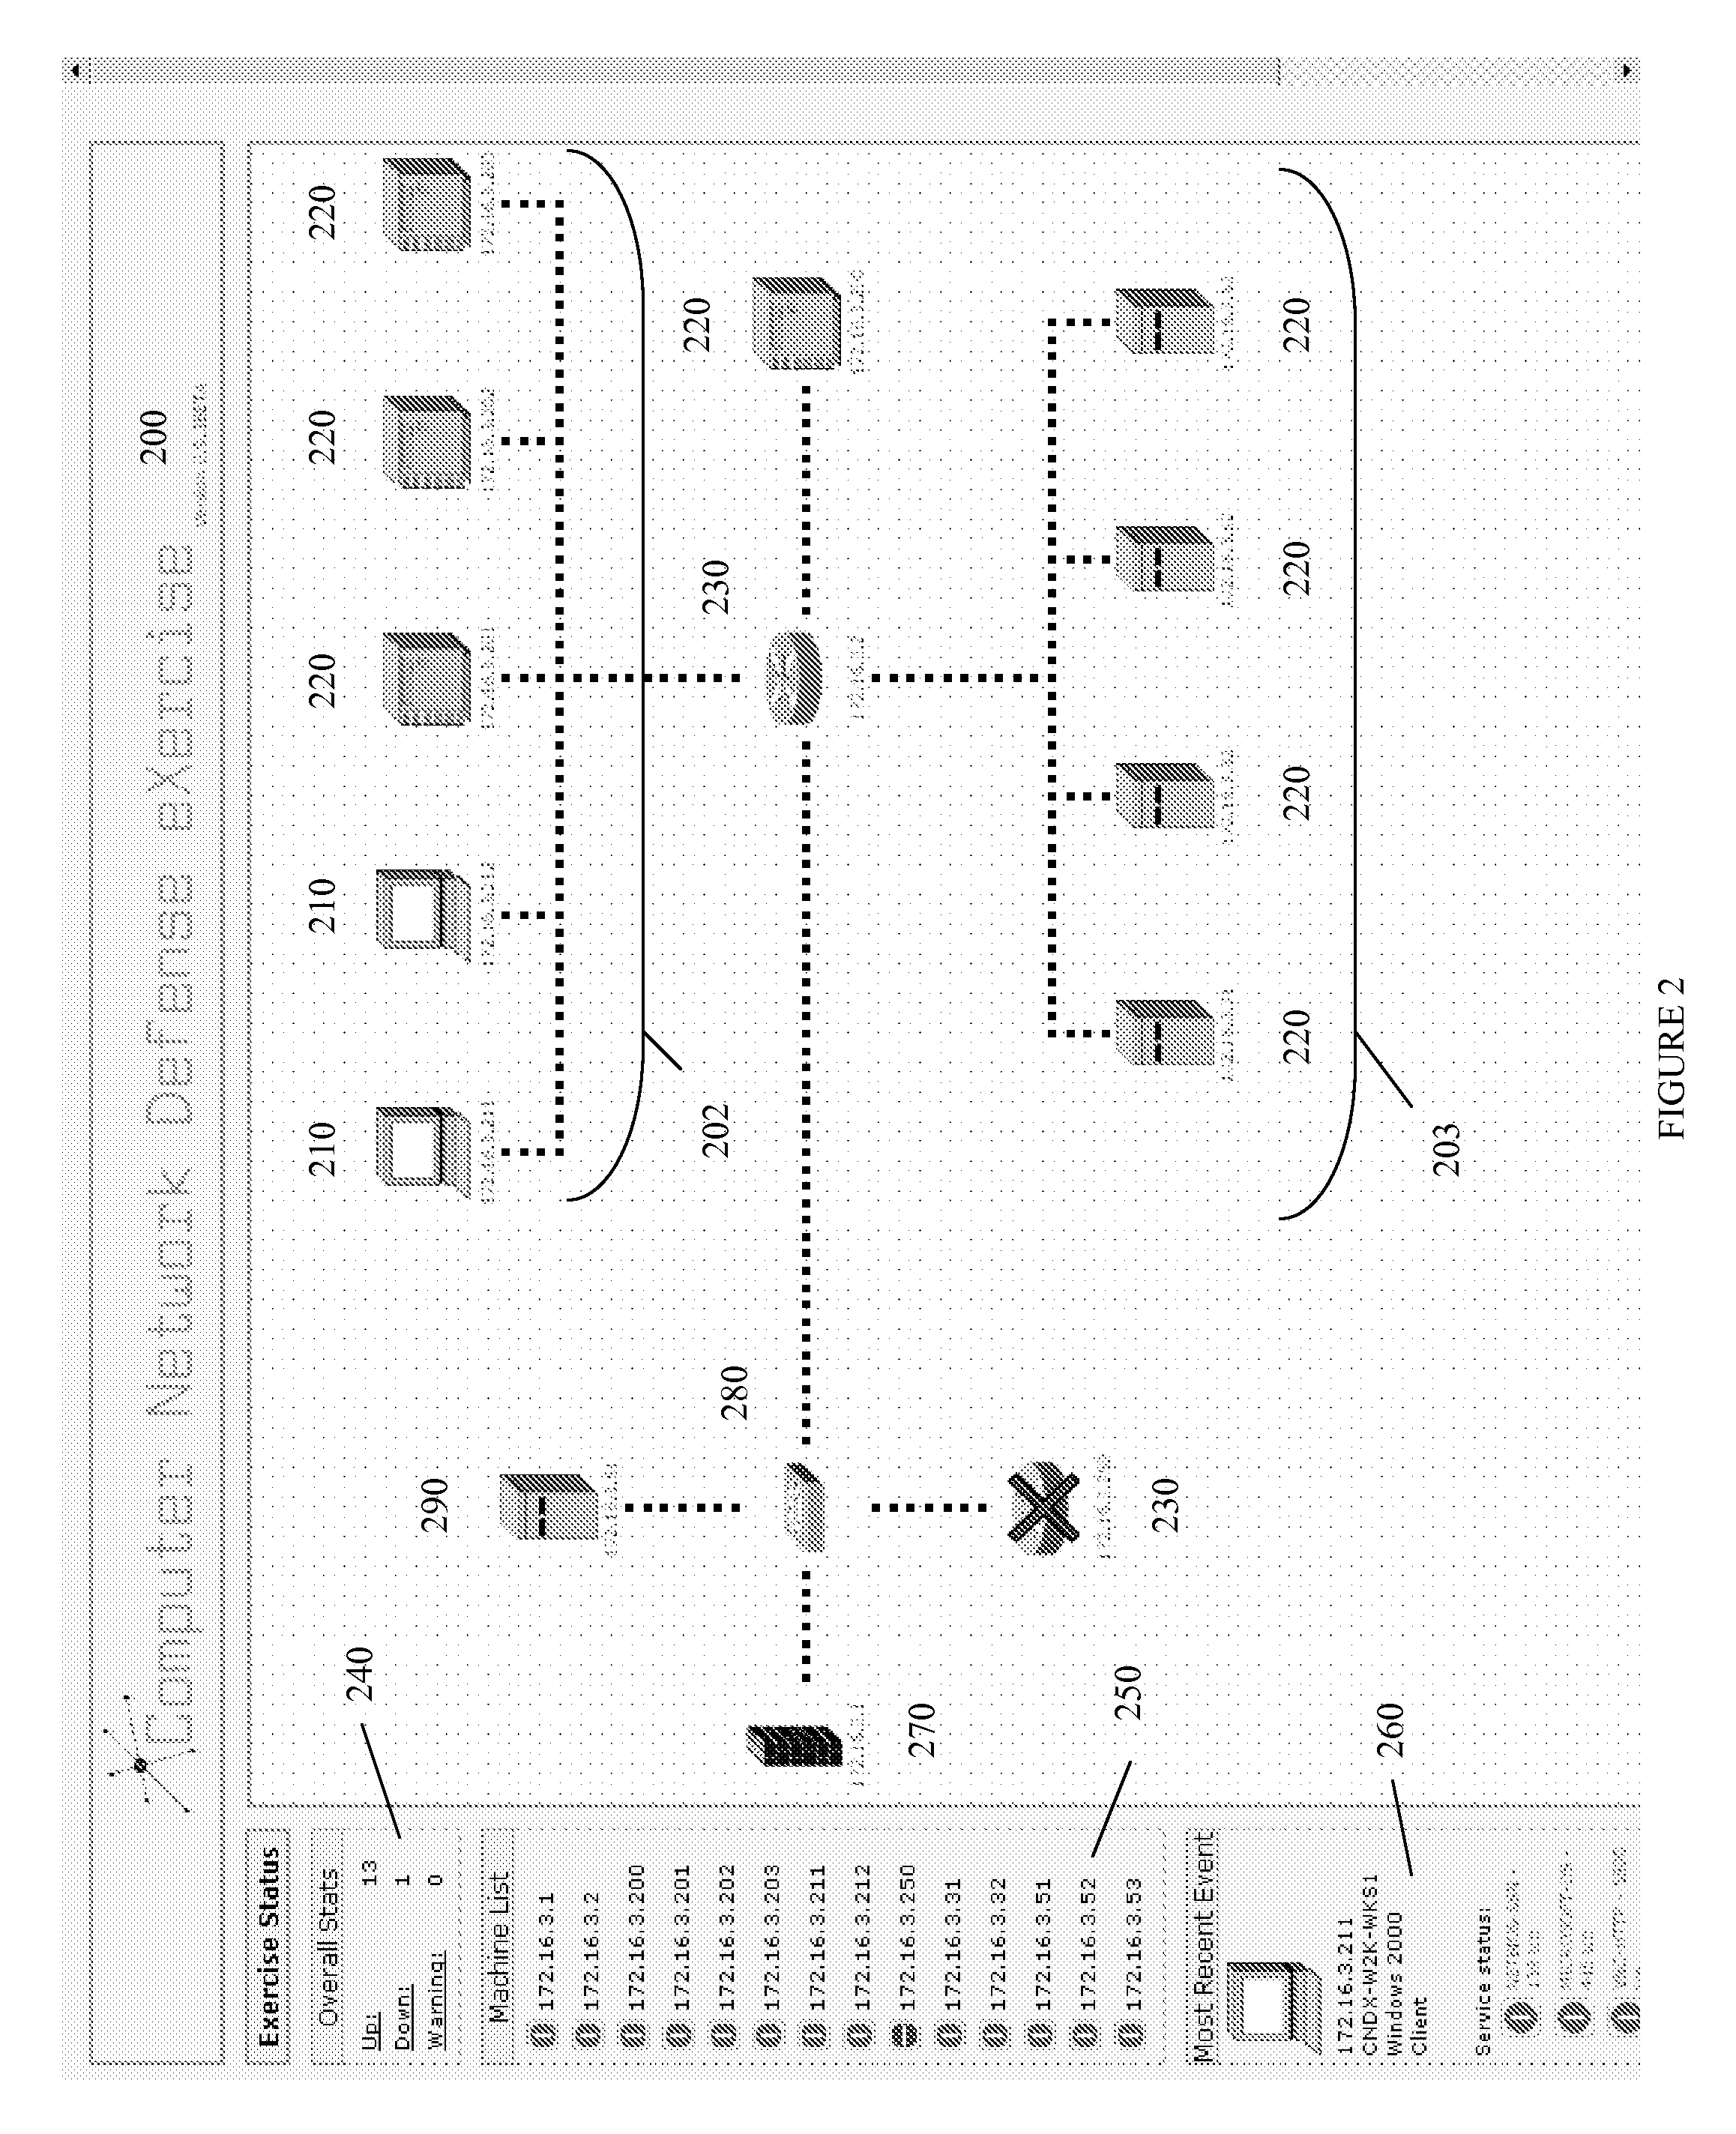 Systems and methods for implementing and scoring computer network defense exercises